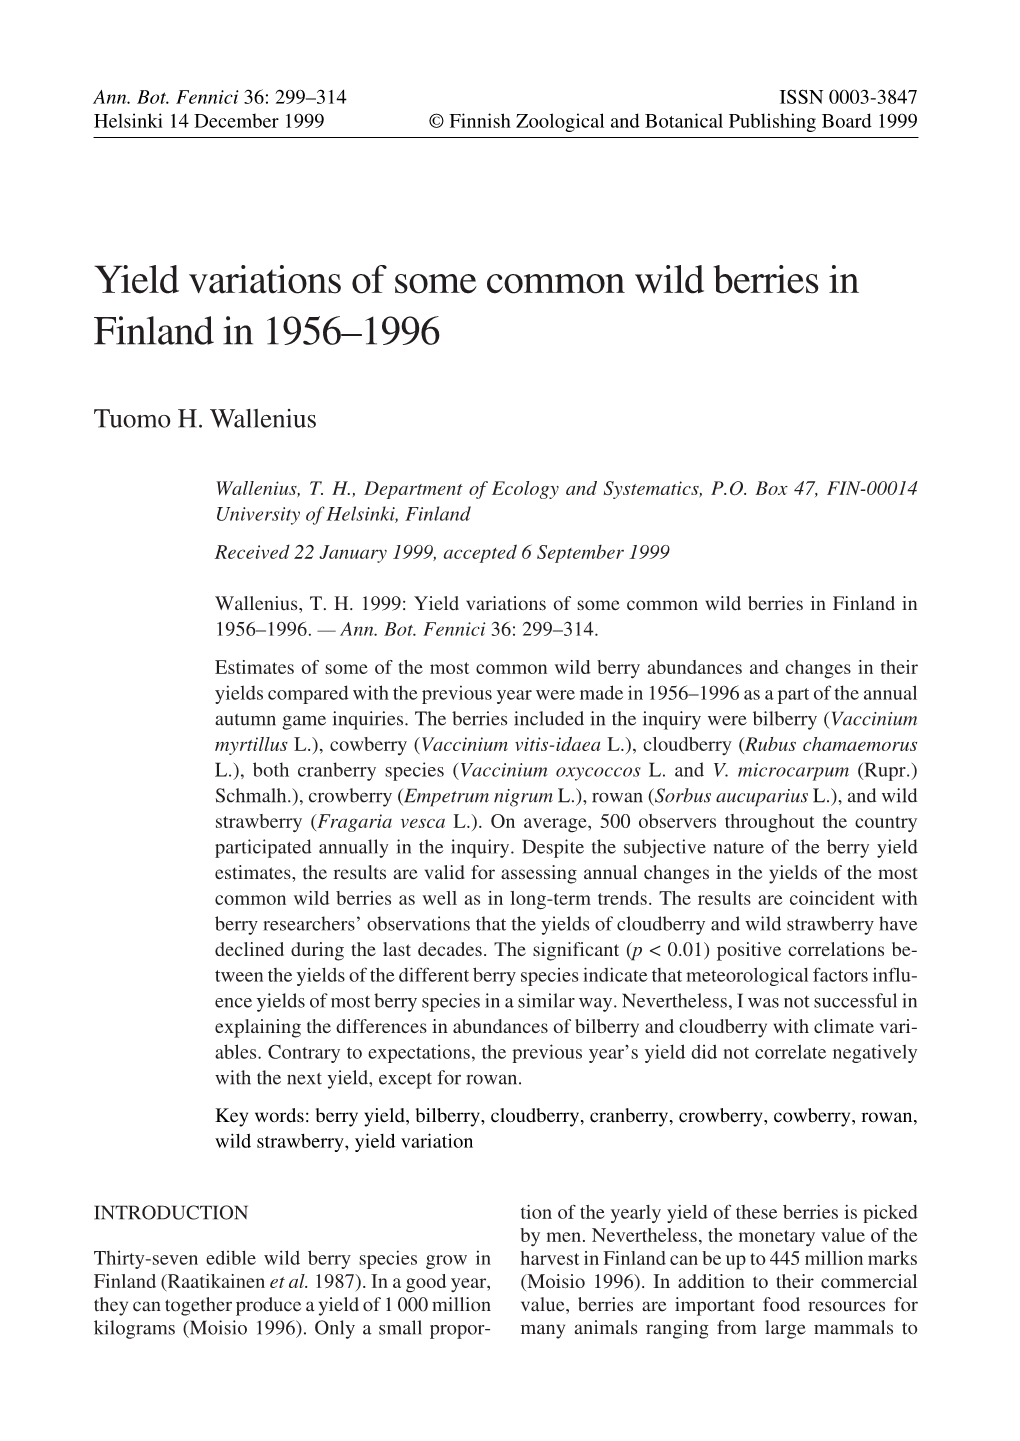 Yield Variations of Some Common Wild Berries in Finland in 1956–1996